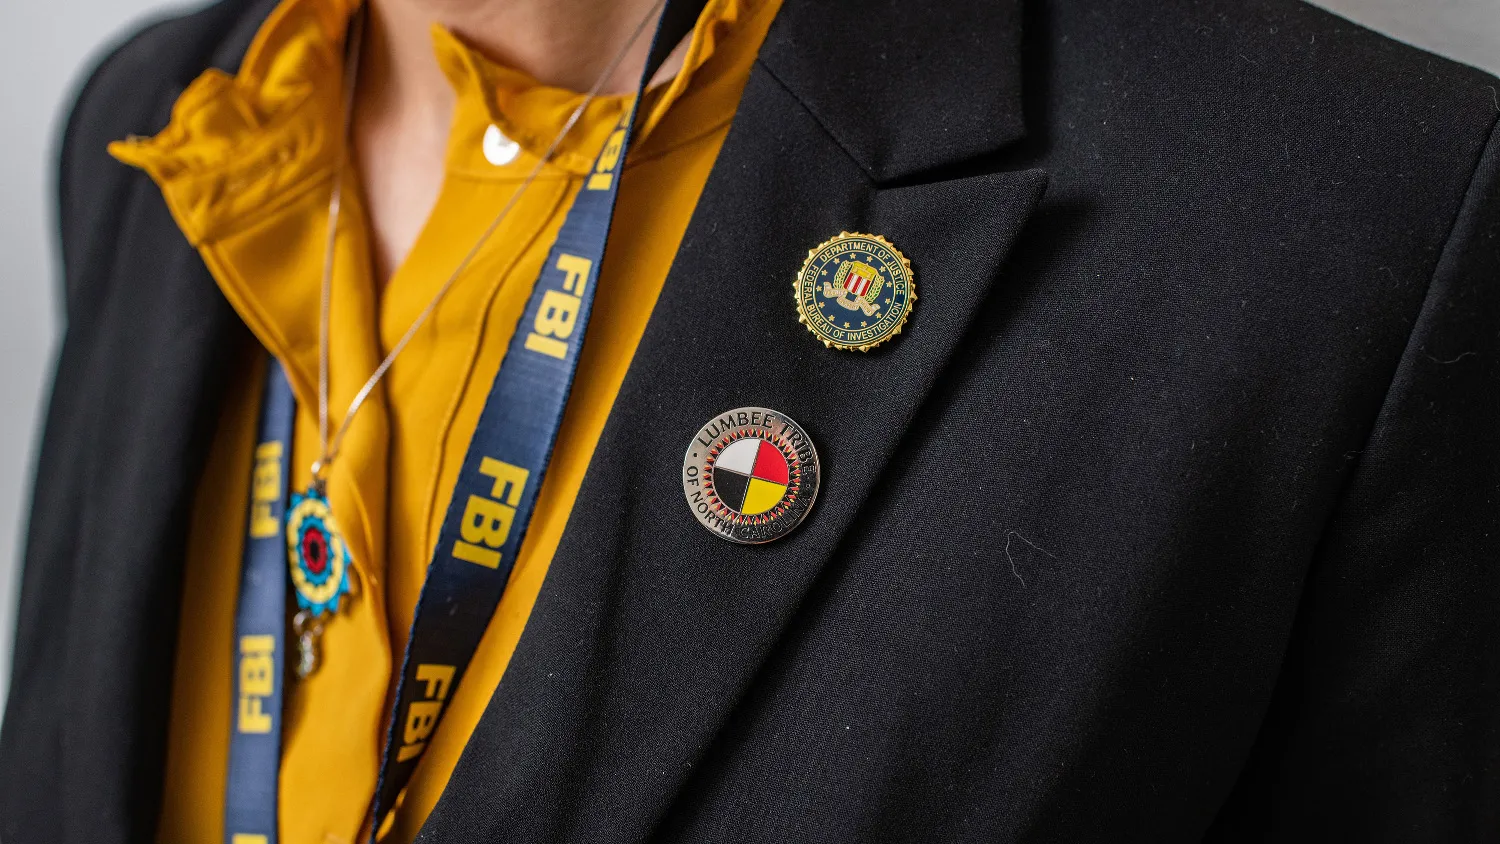 Two pins attached to the lapel of a blazer represent the FBI and the Lumbee Tribe of North Carolina